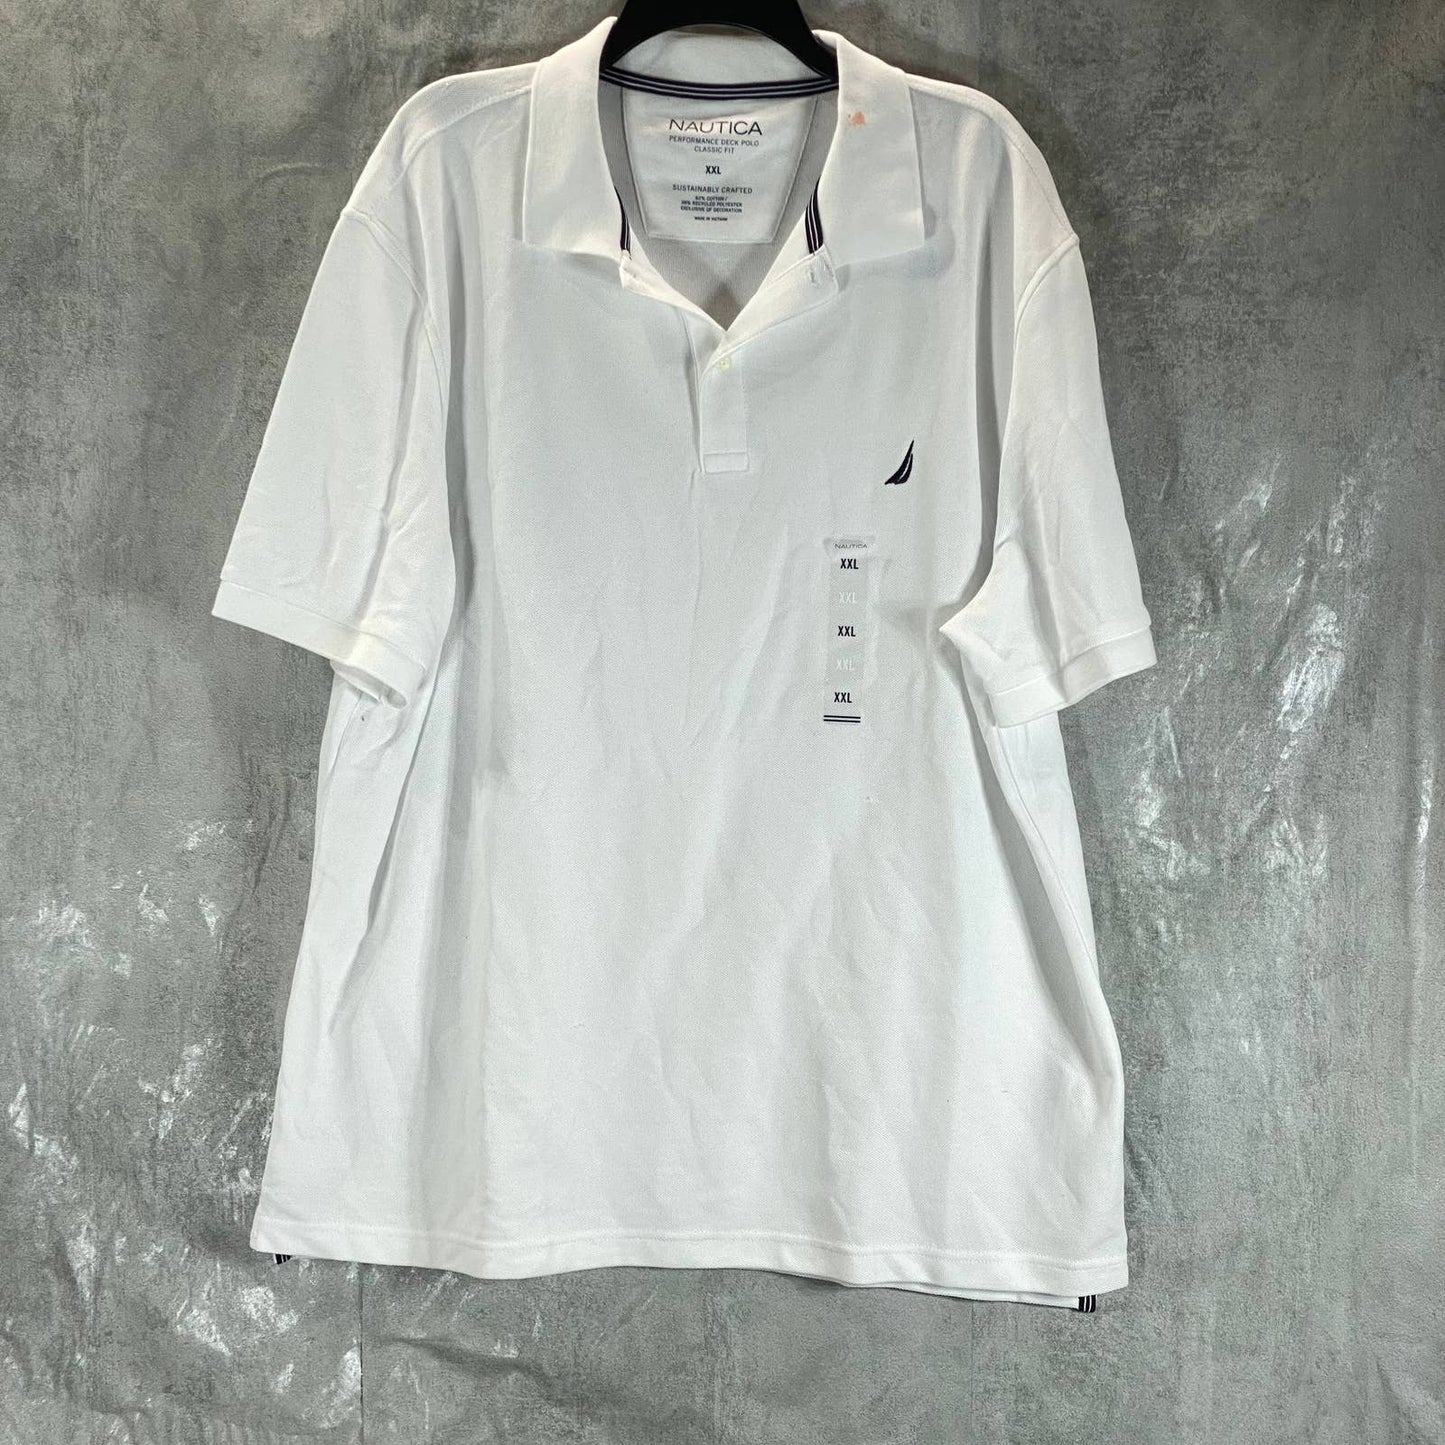 NAUTICA Men's Bright White Sustainably Crafted Deck Classic-Fit Polo Shirt SZ2XL